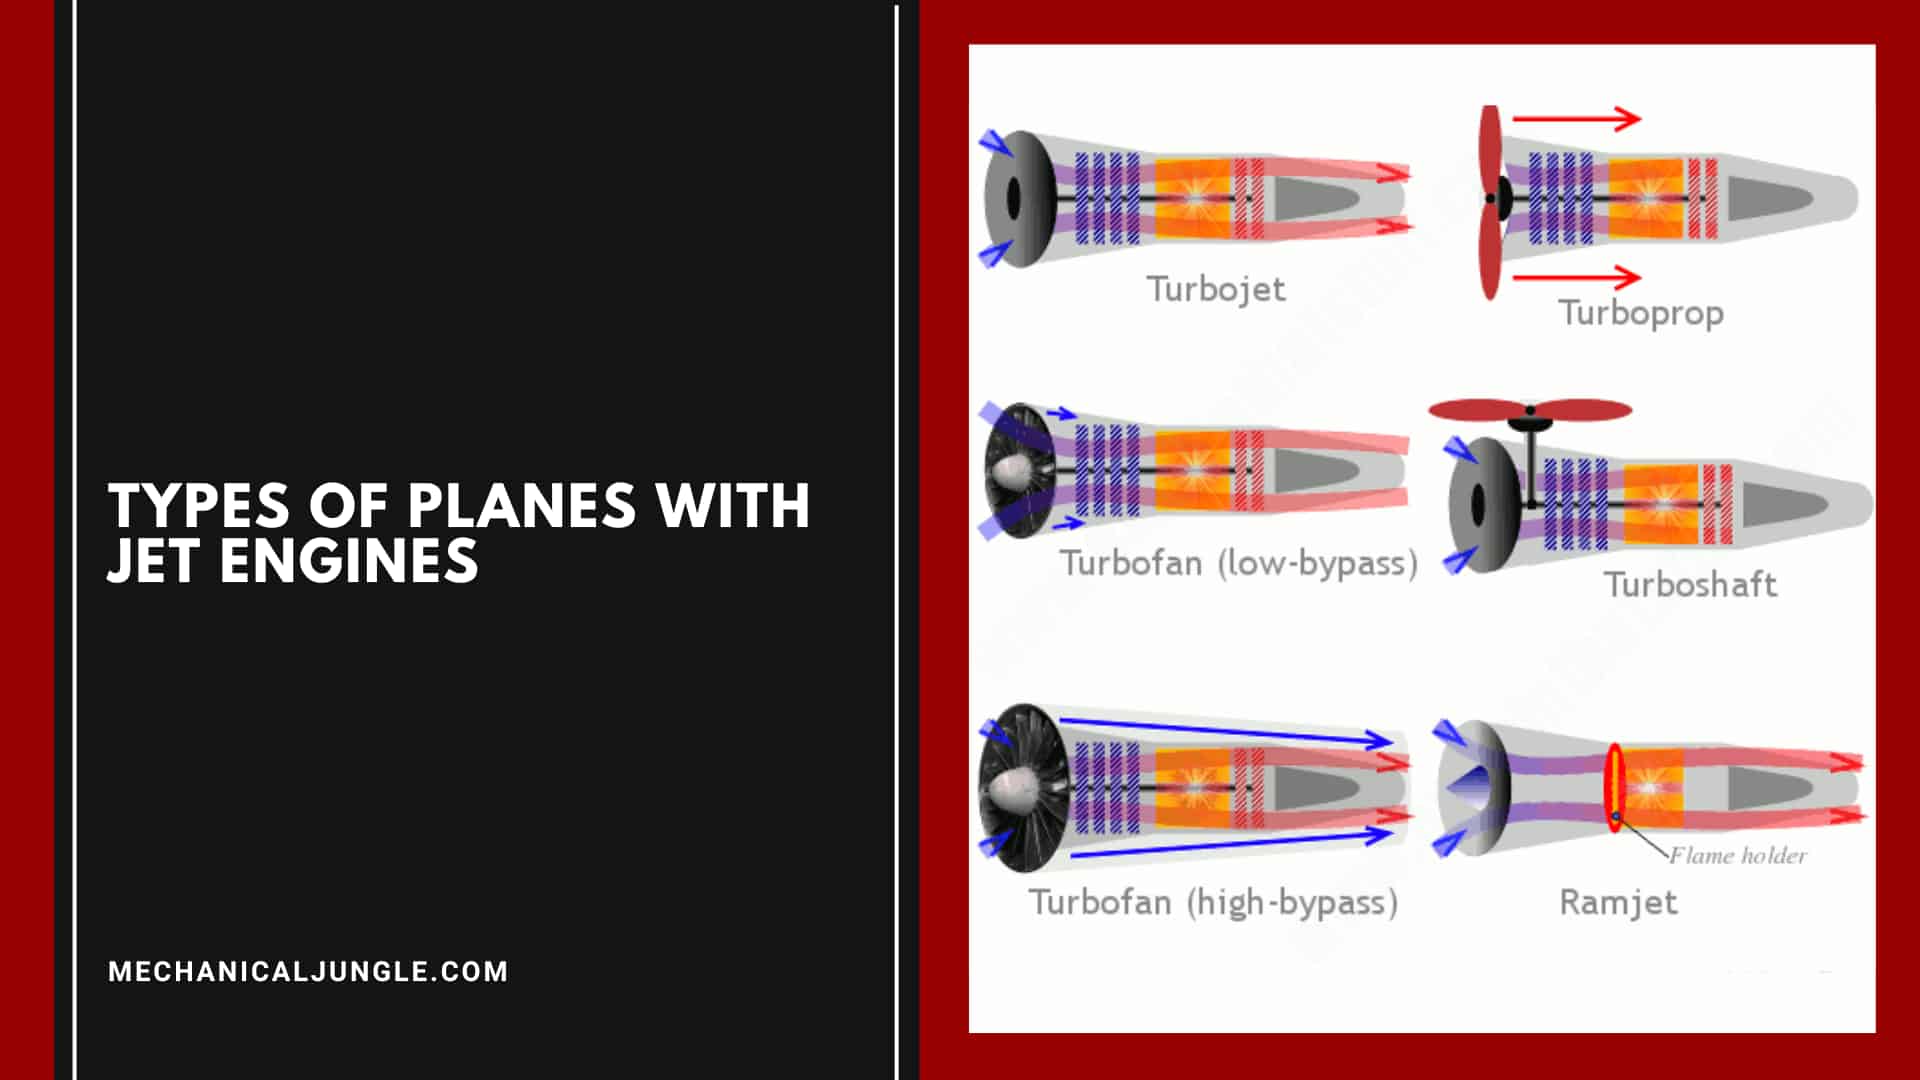 Types of Planes with Jet Engines